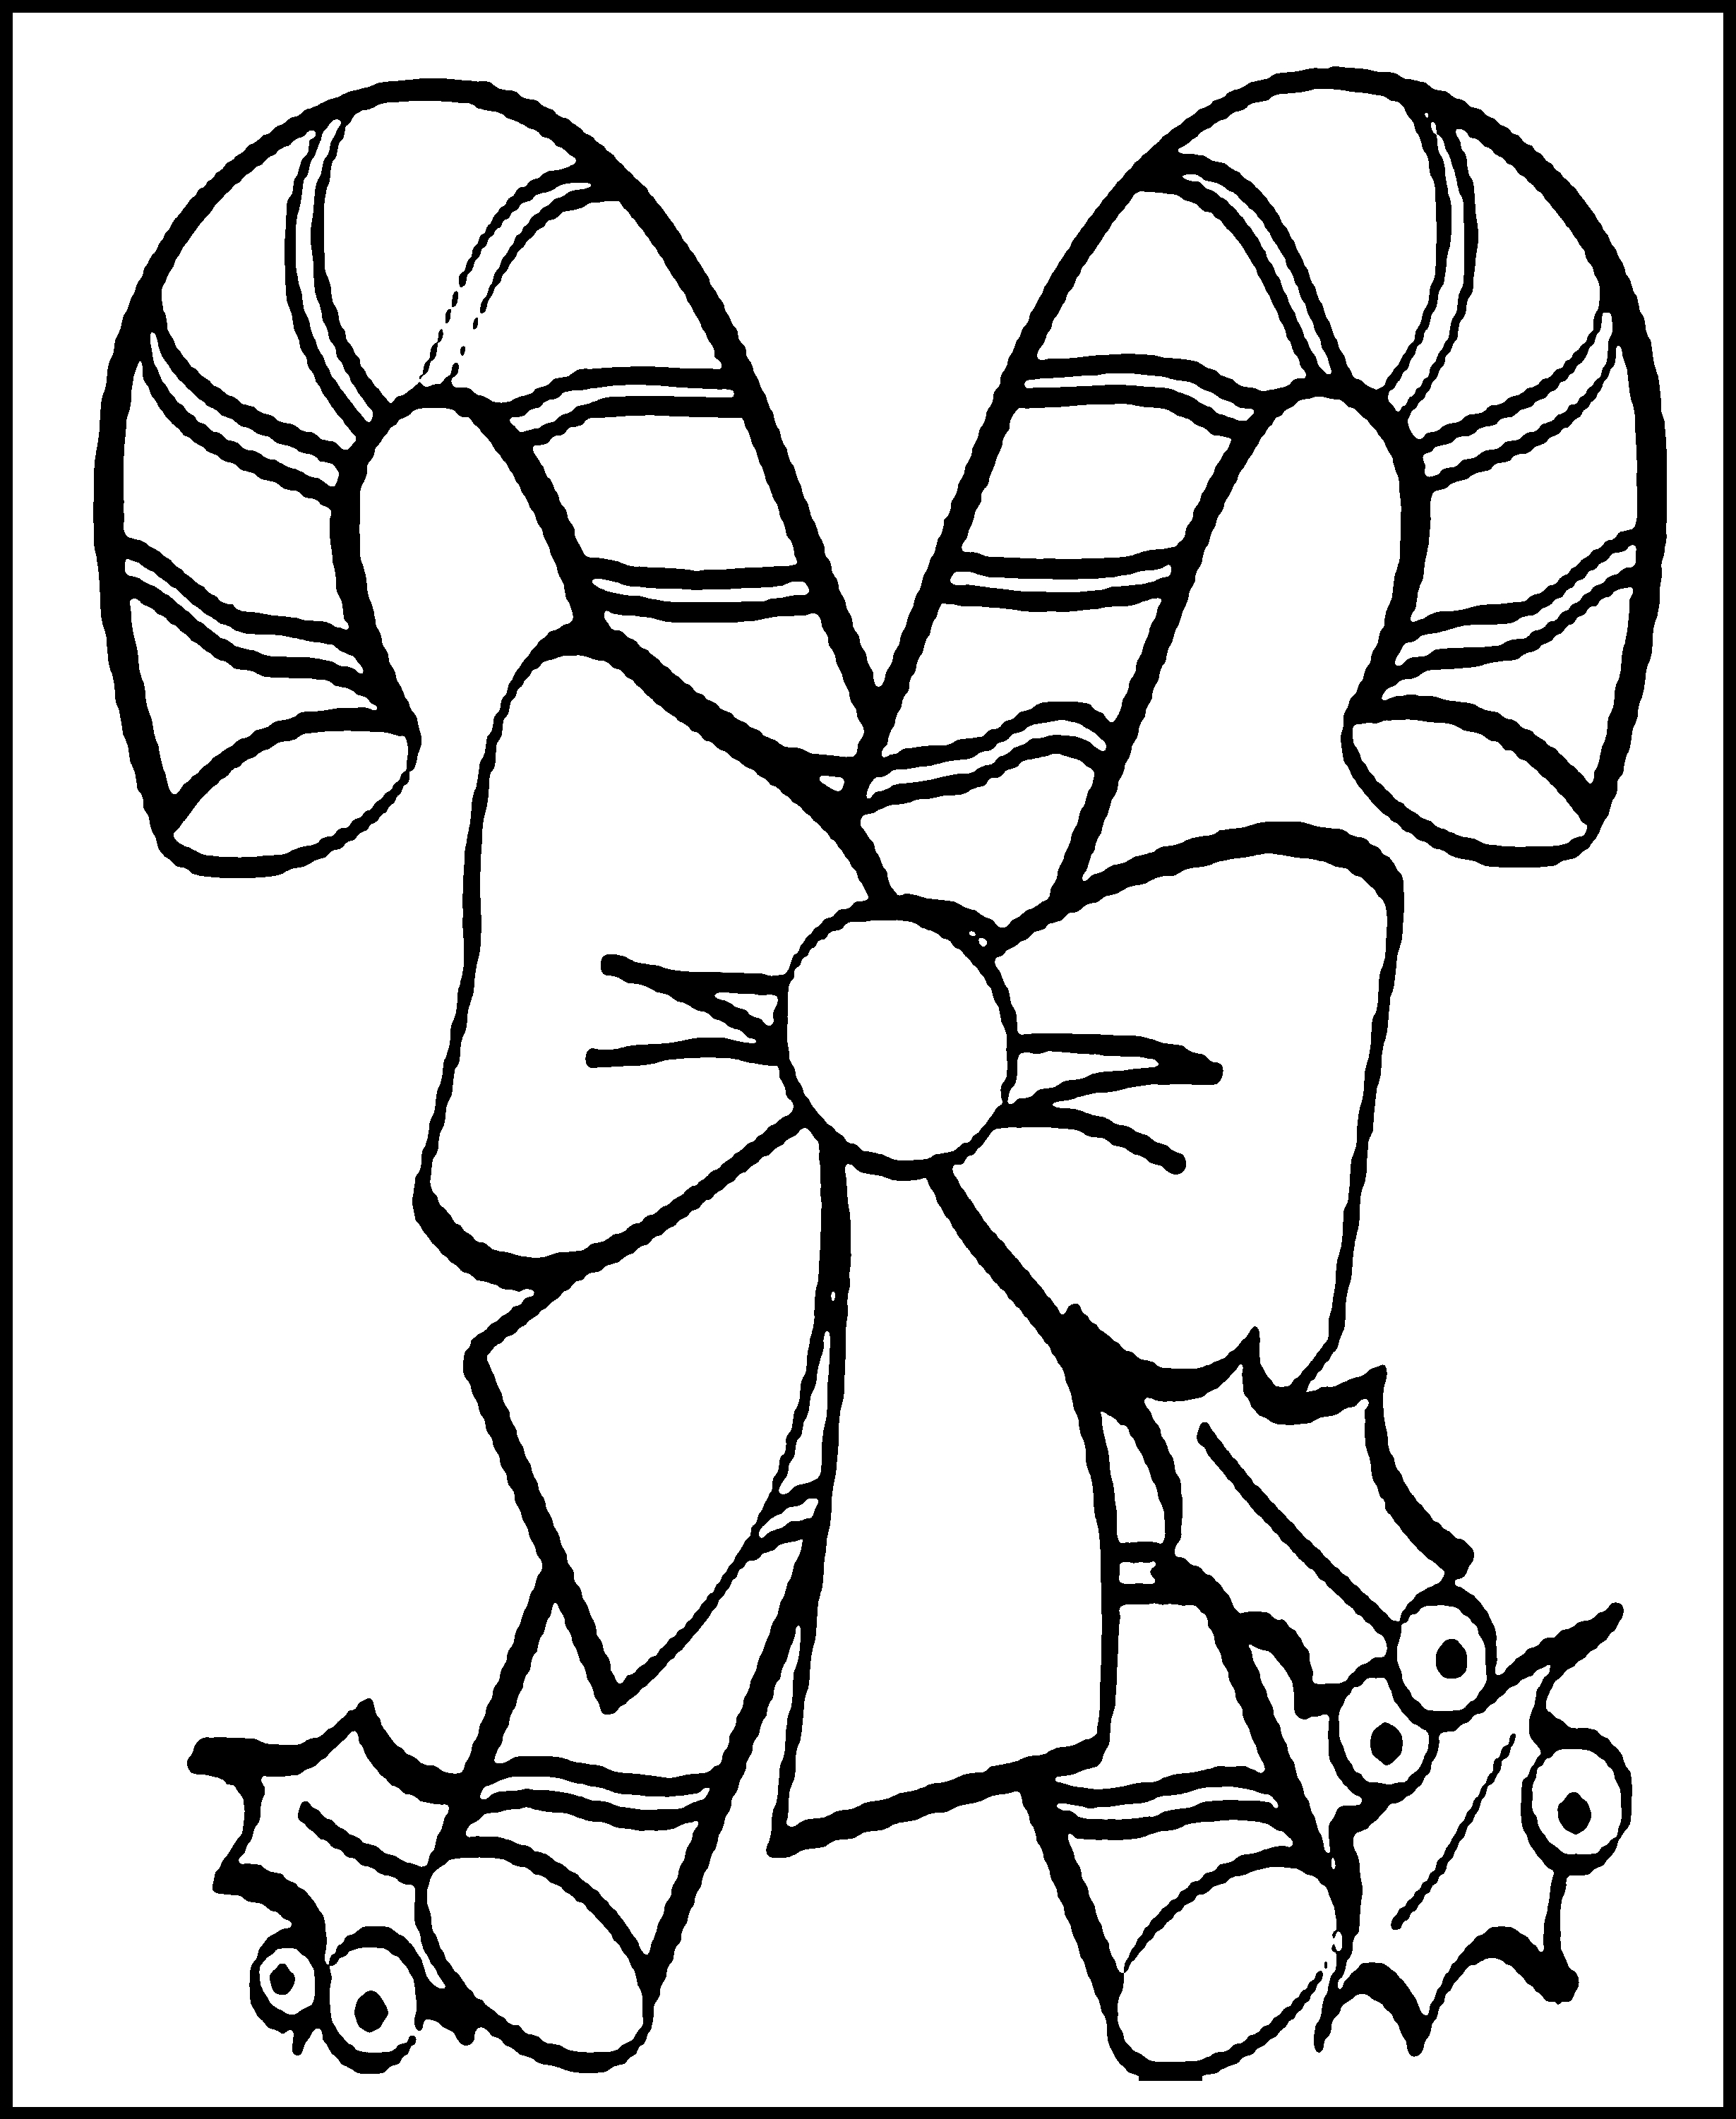 Free Printable Candy Cane Coloring Pages For Kids | Young At Heart - Free Printable Christmas Coloring Pages And Activities